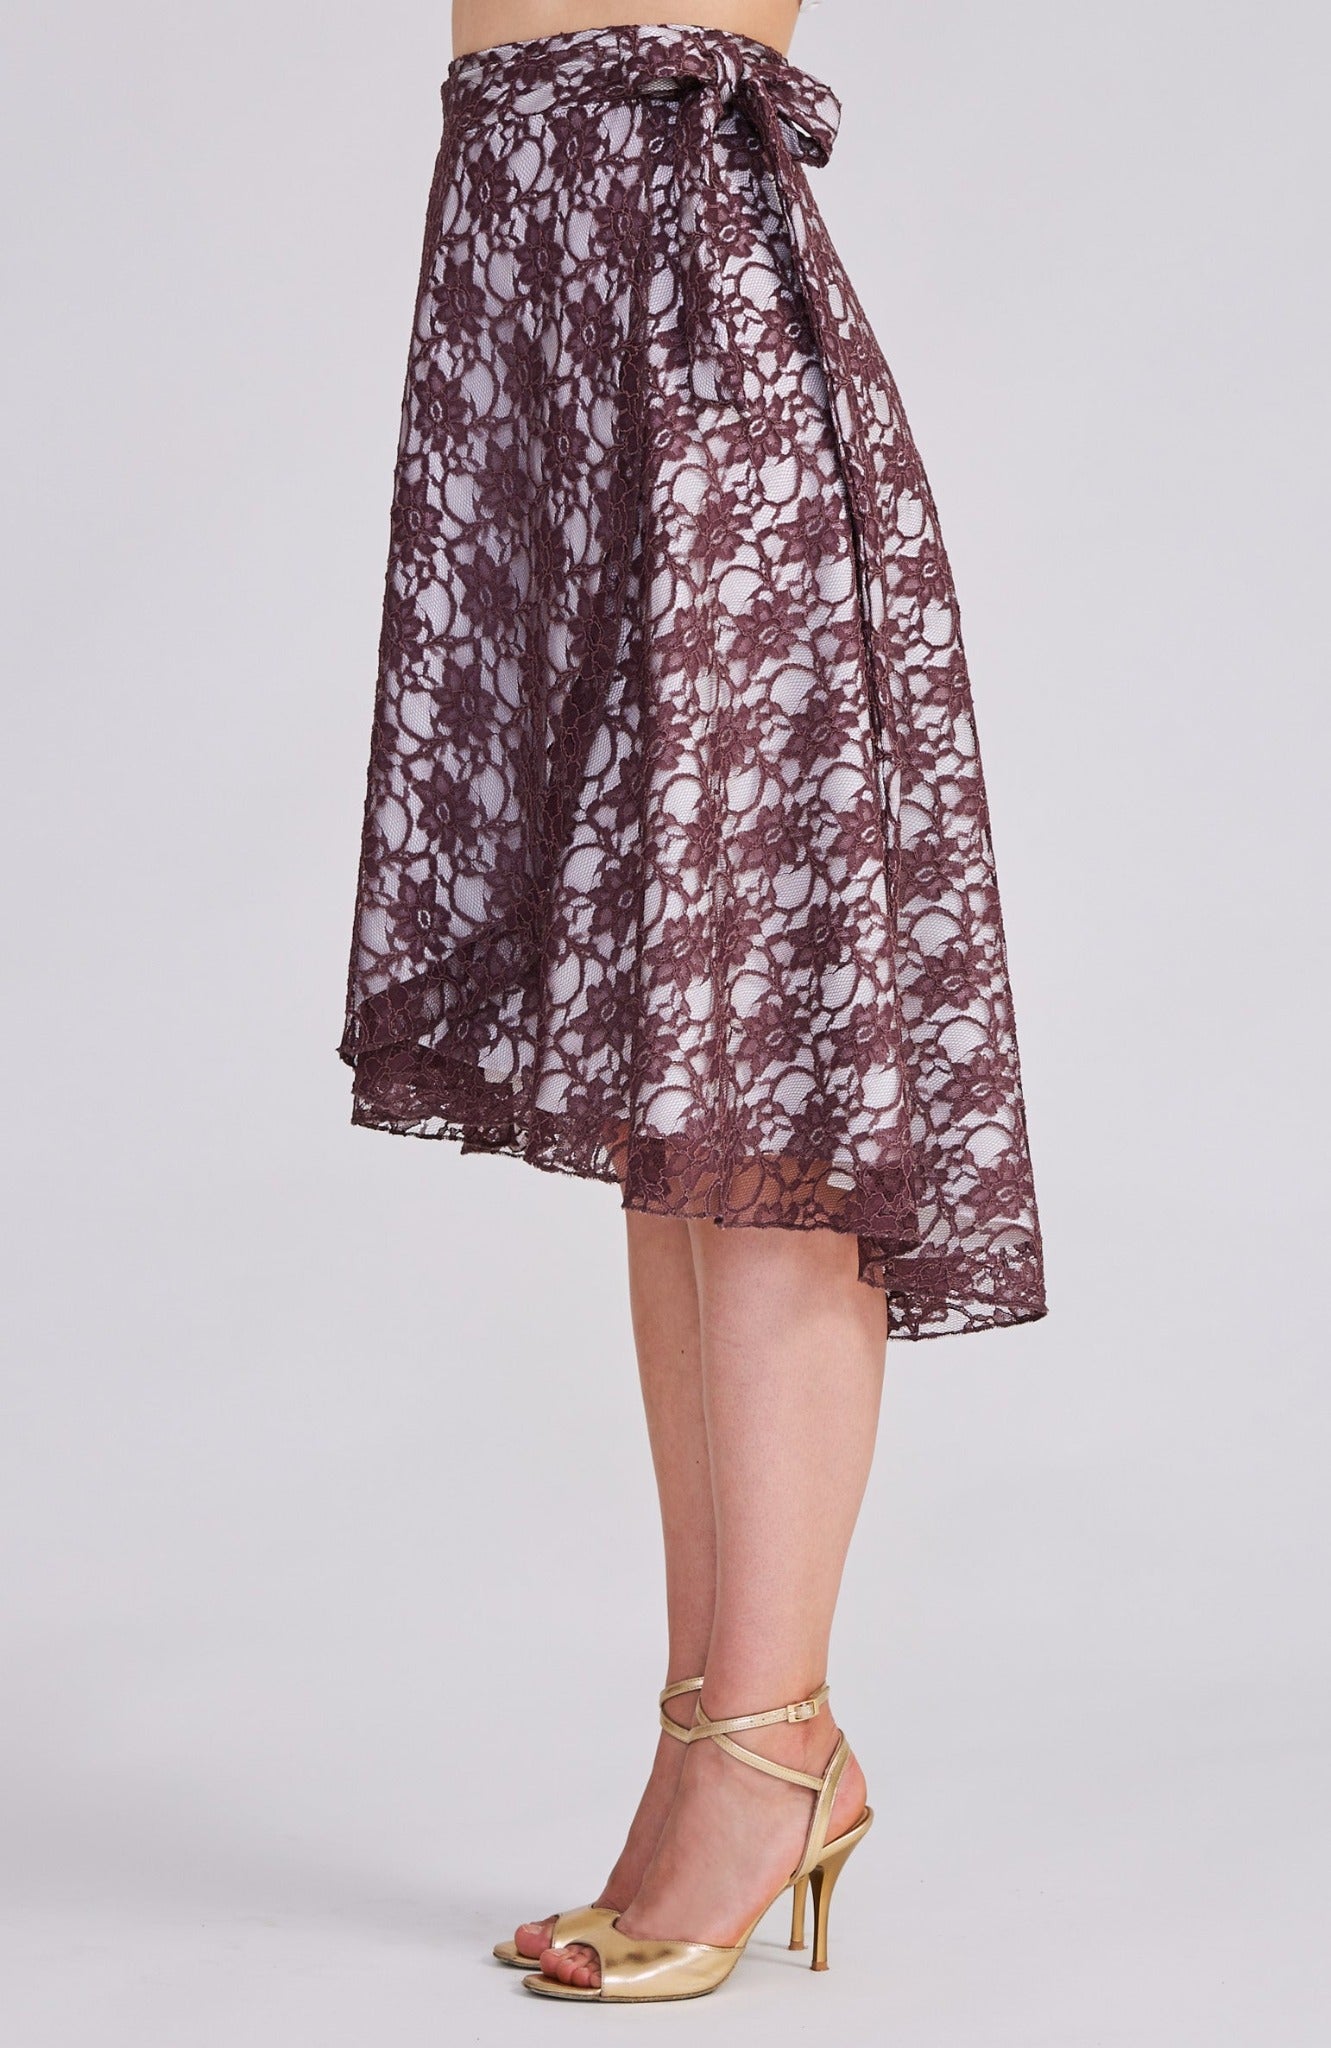 wrap skirt in chocolate lace